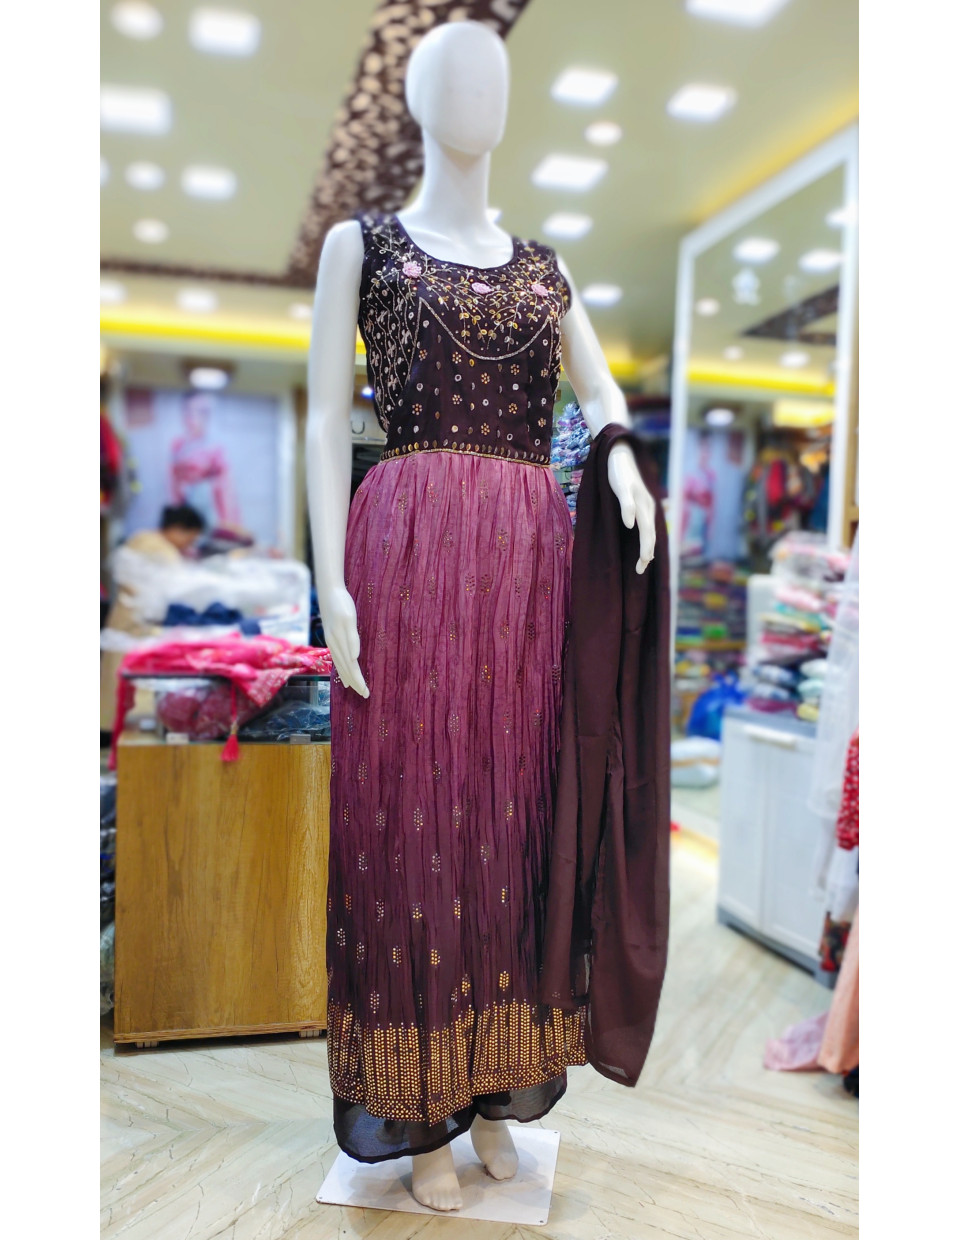 Silk Long Fancy Kurti Set With All Over Beads And Swarovski Work Design (KR2161)